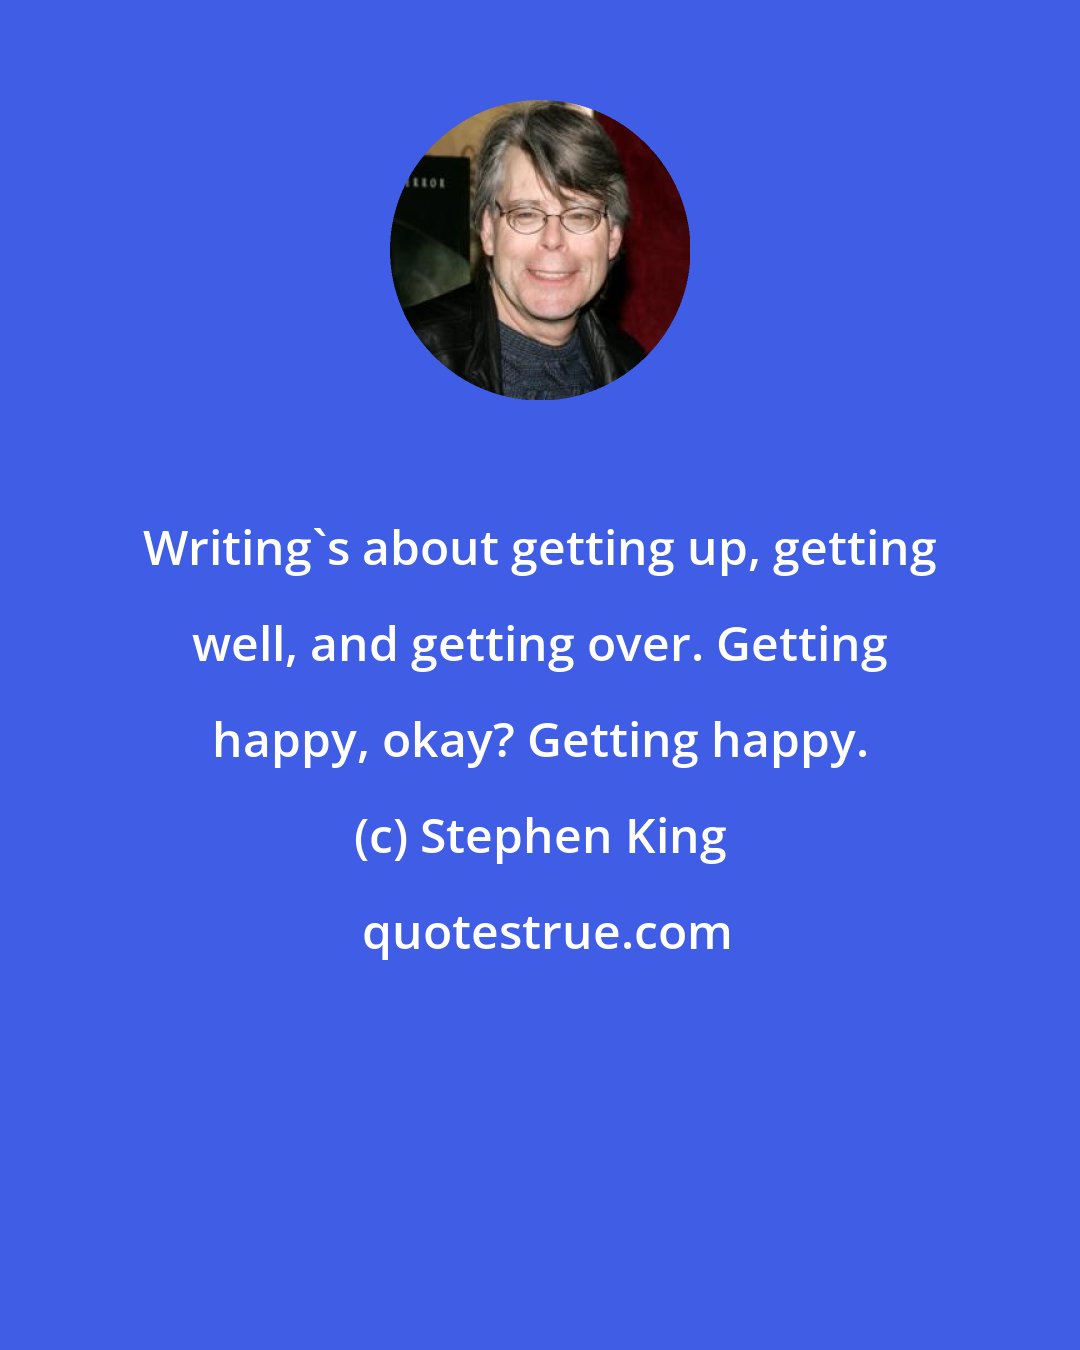 Stephen King: Writing's about getting up, getting well, and getting over. Getting happy, okay? Getting happy.